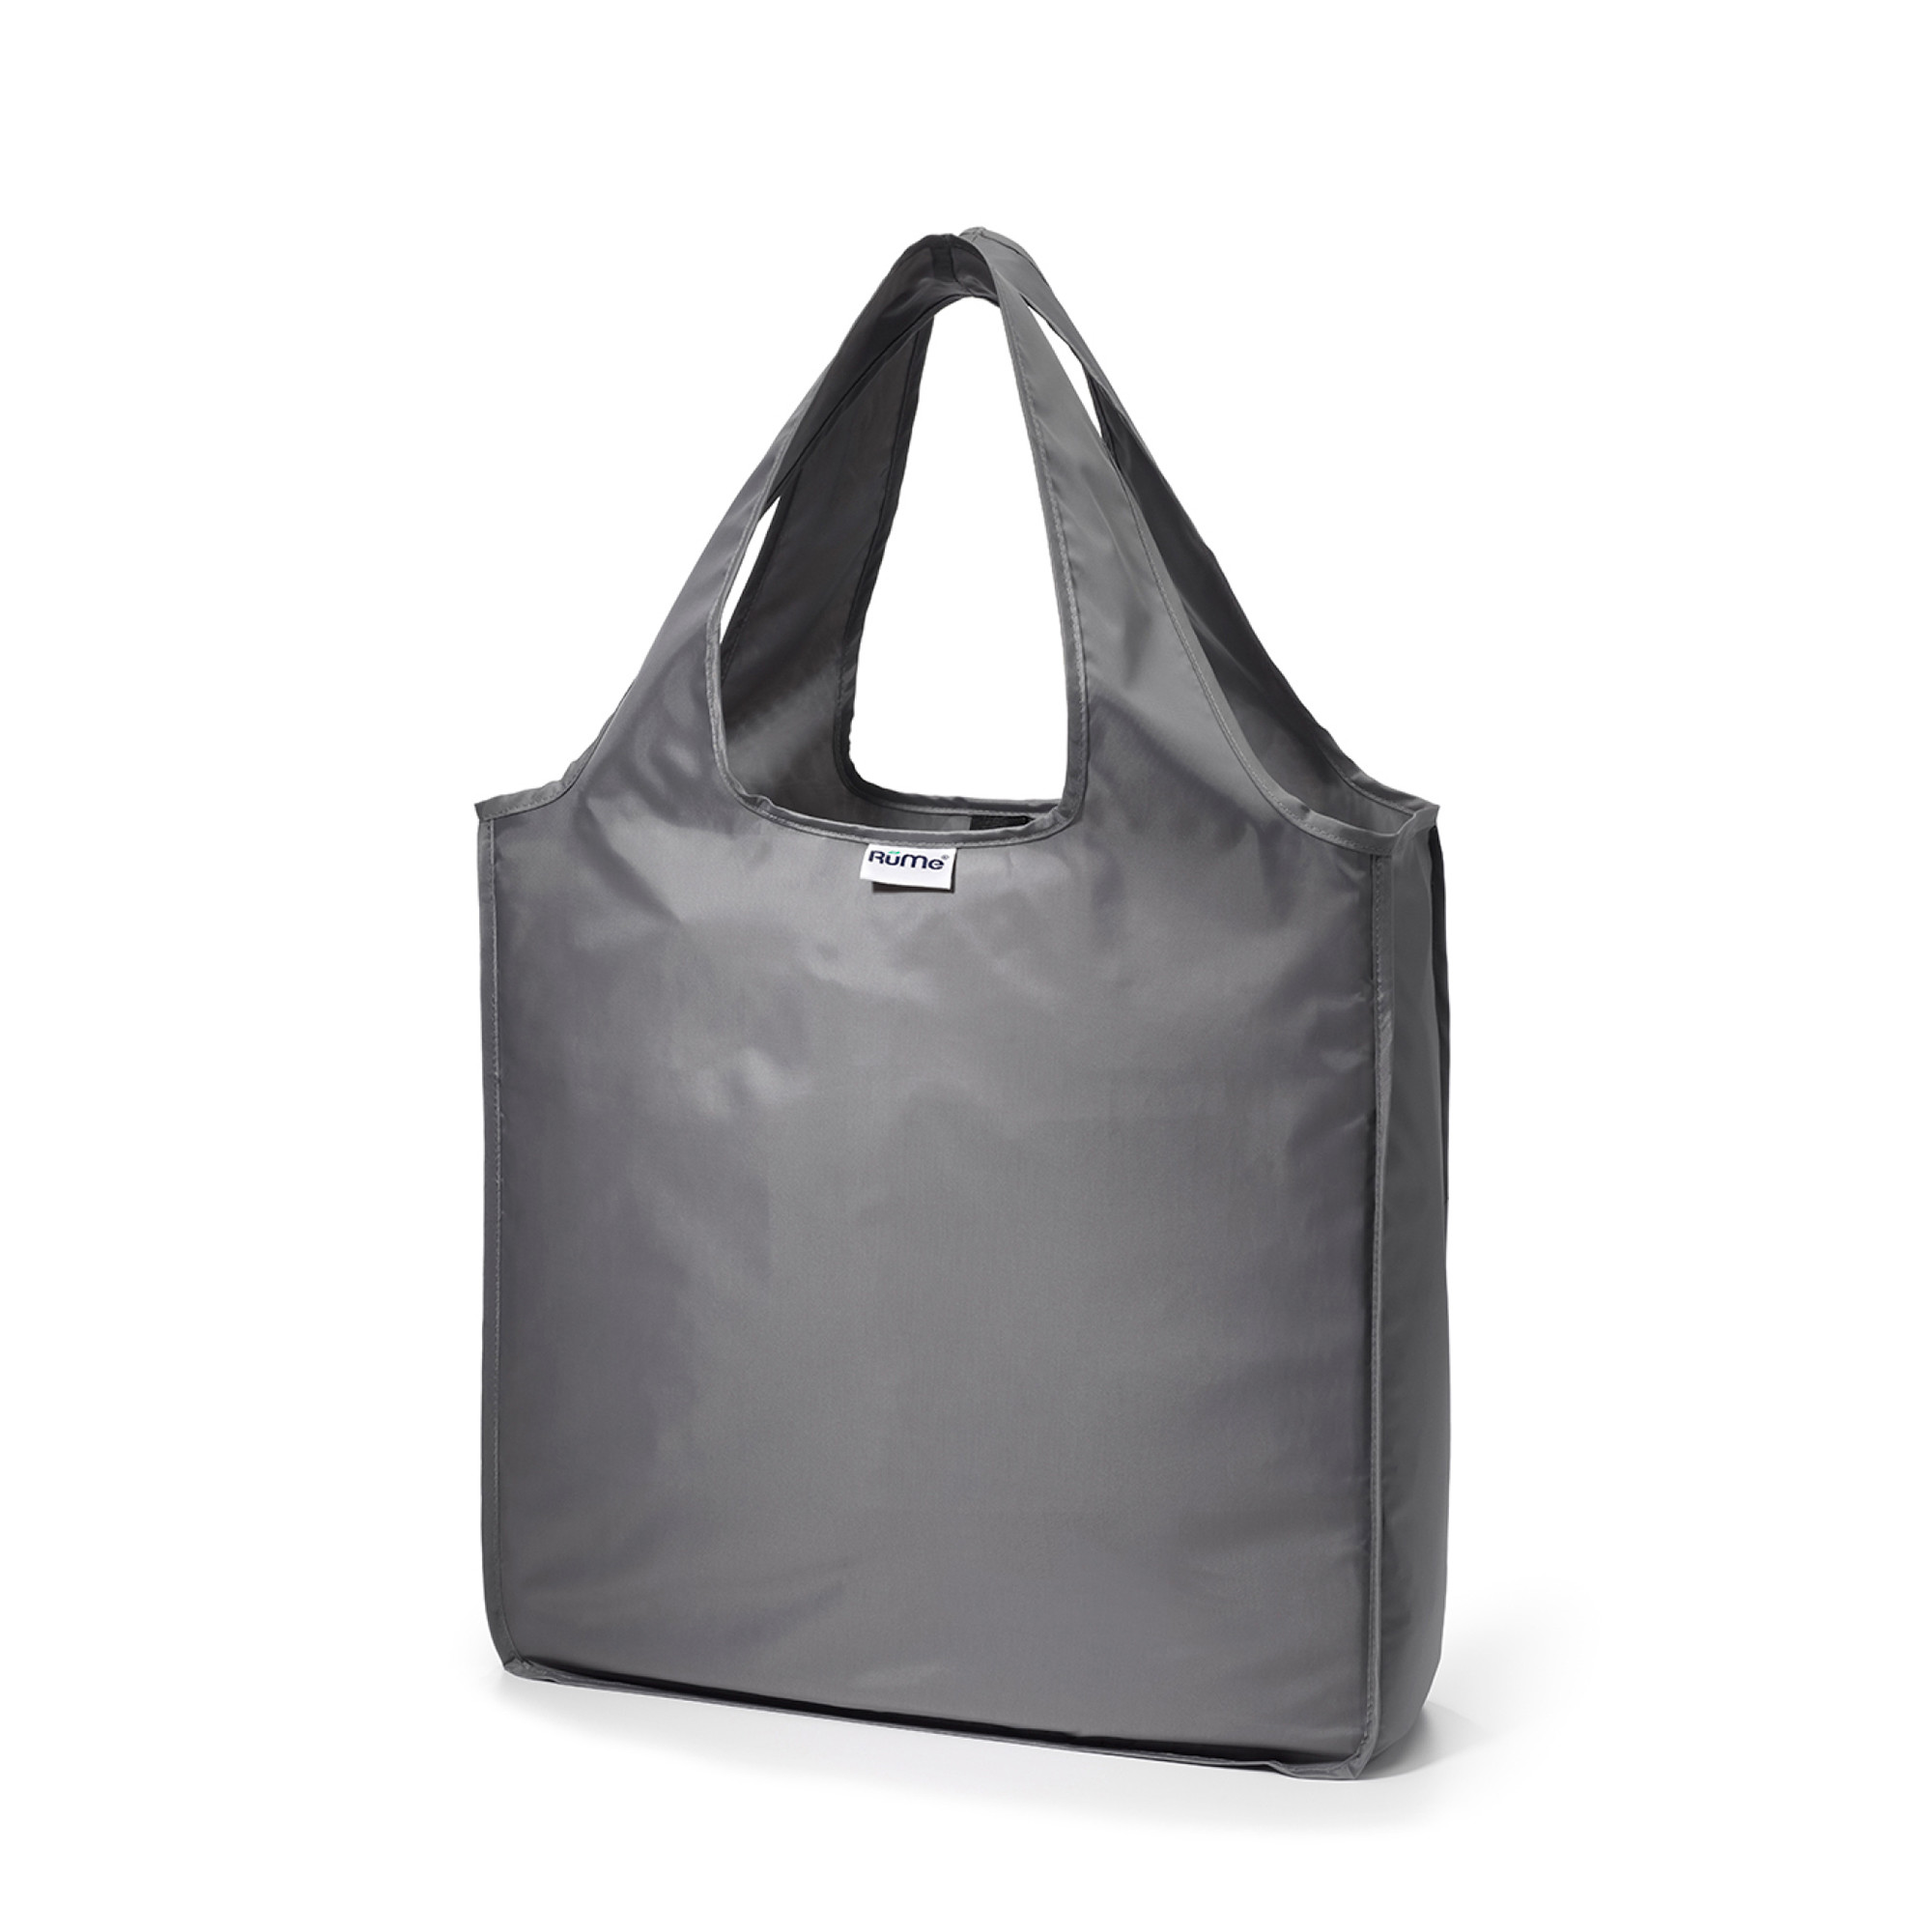 RuMe 100018 - Classic Medium Tote $6.60 - Gifts 10 and Under